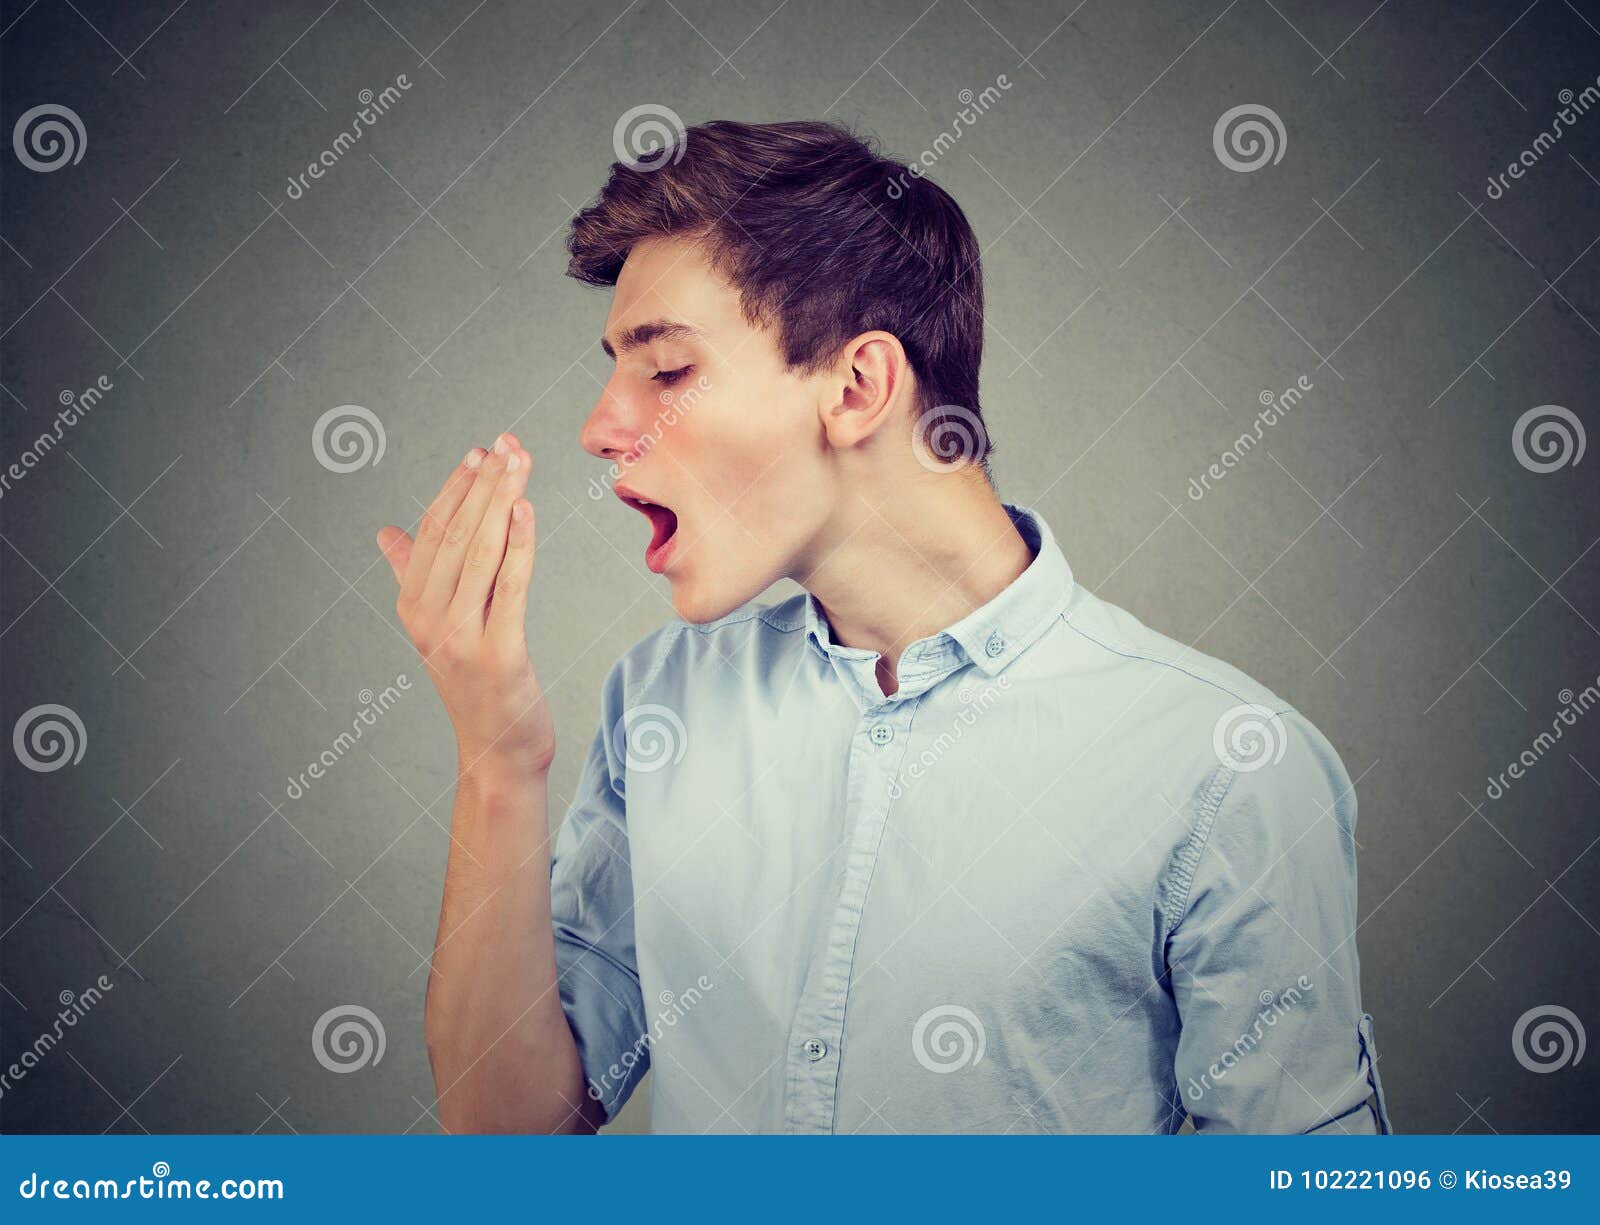 man checking his breath with hand.